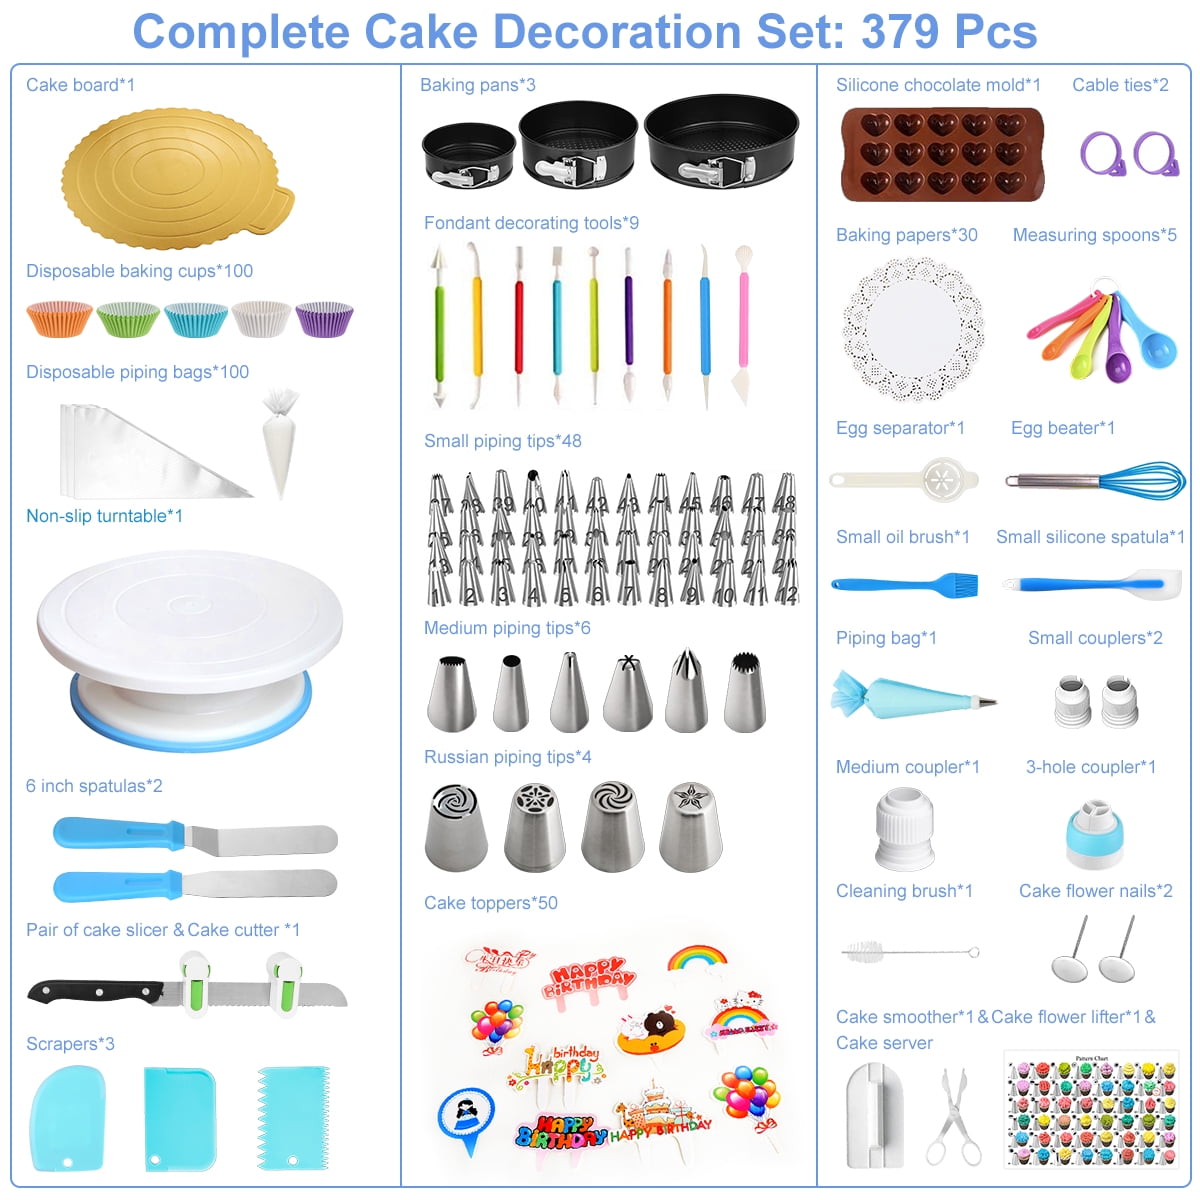 2 Spatula Turntable Stand 3 Squeegee,1 Silicone Flower Bag,100 Disposable Pastry Bags,1 Cake Cutters and More Accessories Yookat 142pcs Cake Decorating Supplies Set 27 Icing Tips,1 Chocolate mold 